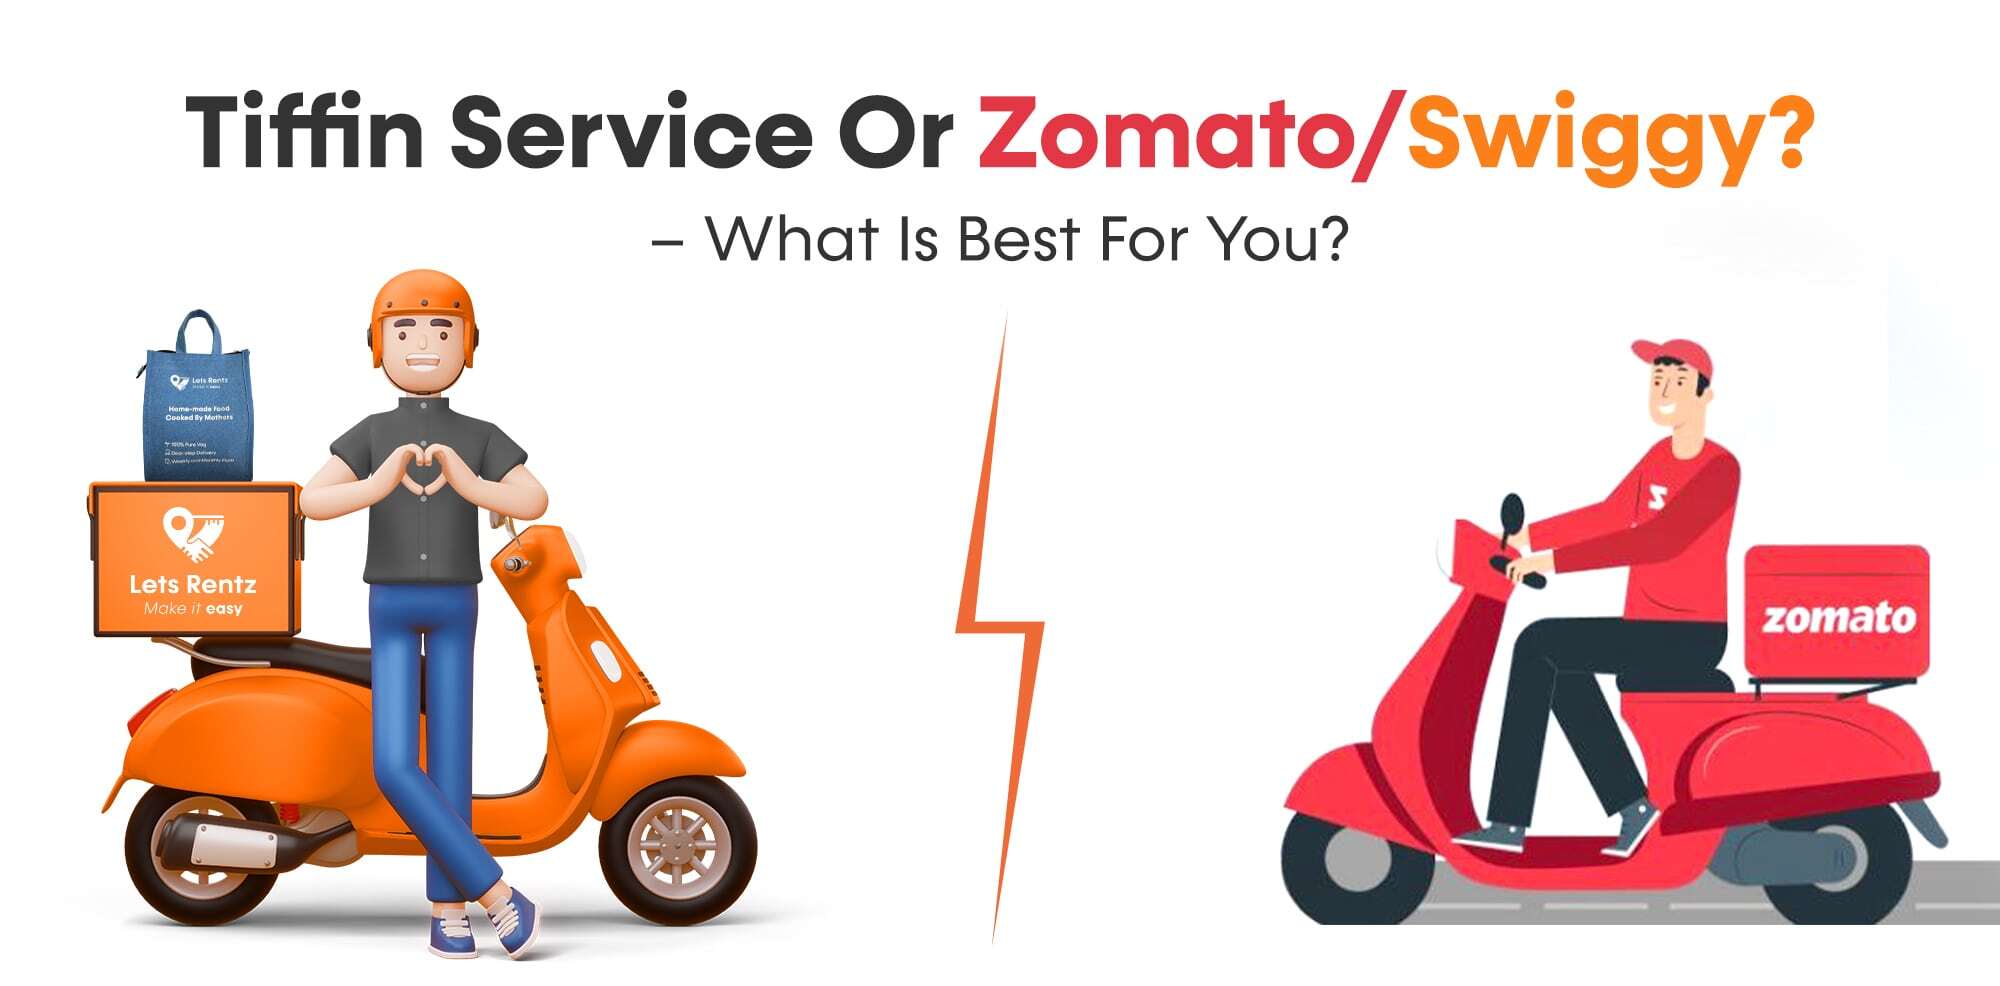 Tiffin Service or Zomato/Swiggy? - What is Best for You?